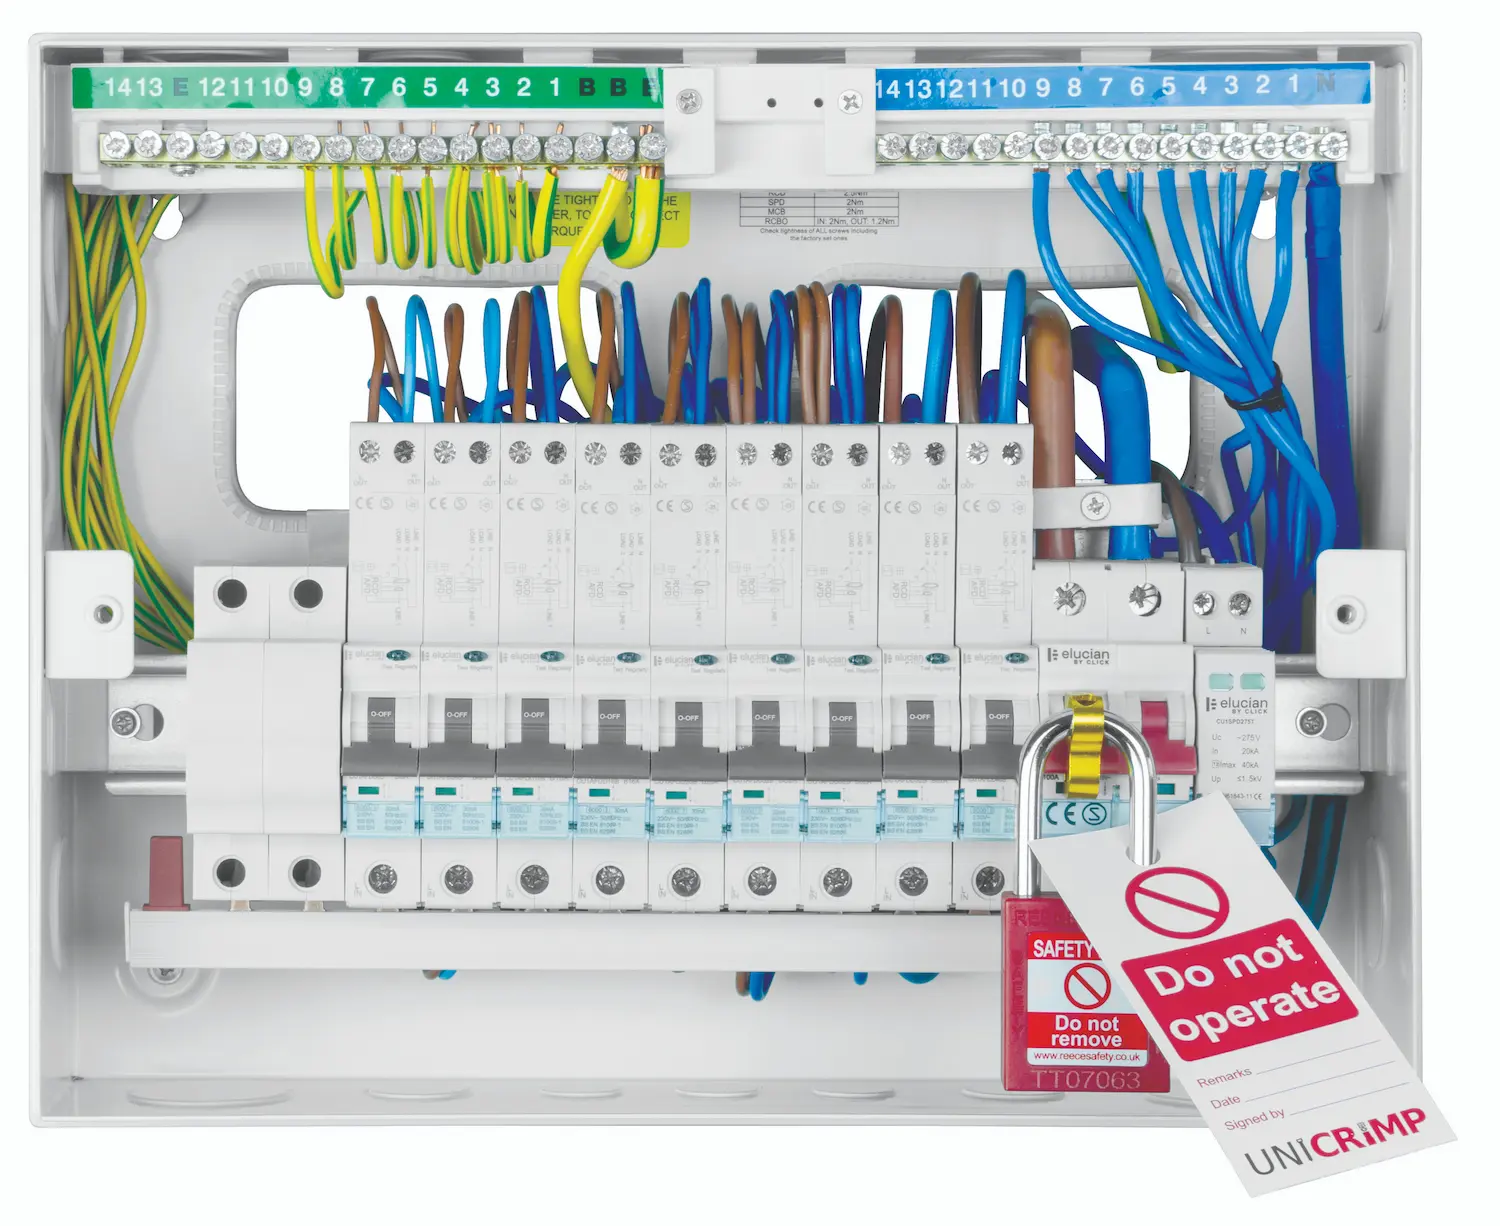 New Elucian fuse board with RCD and SPD